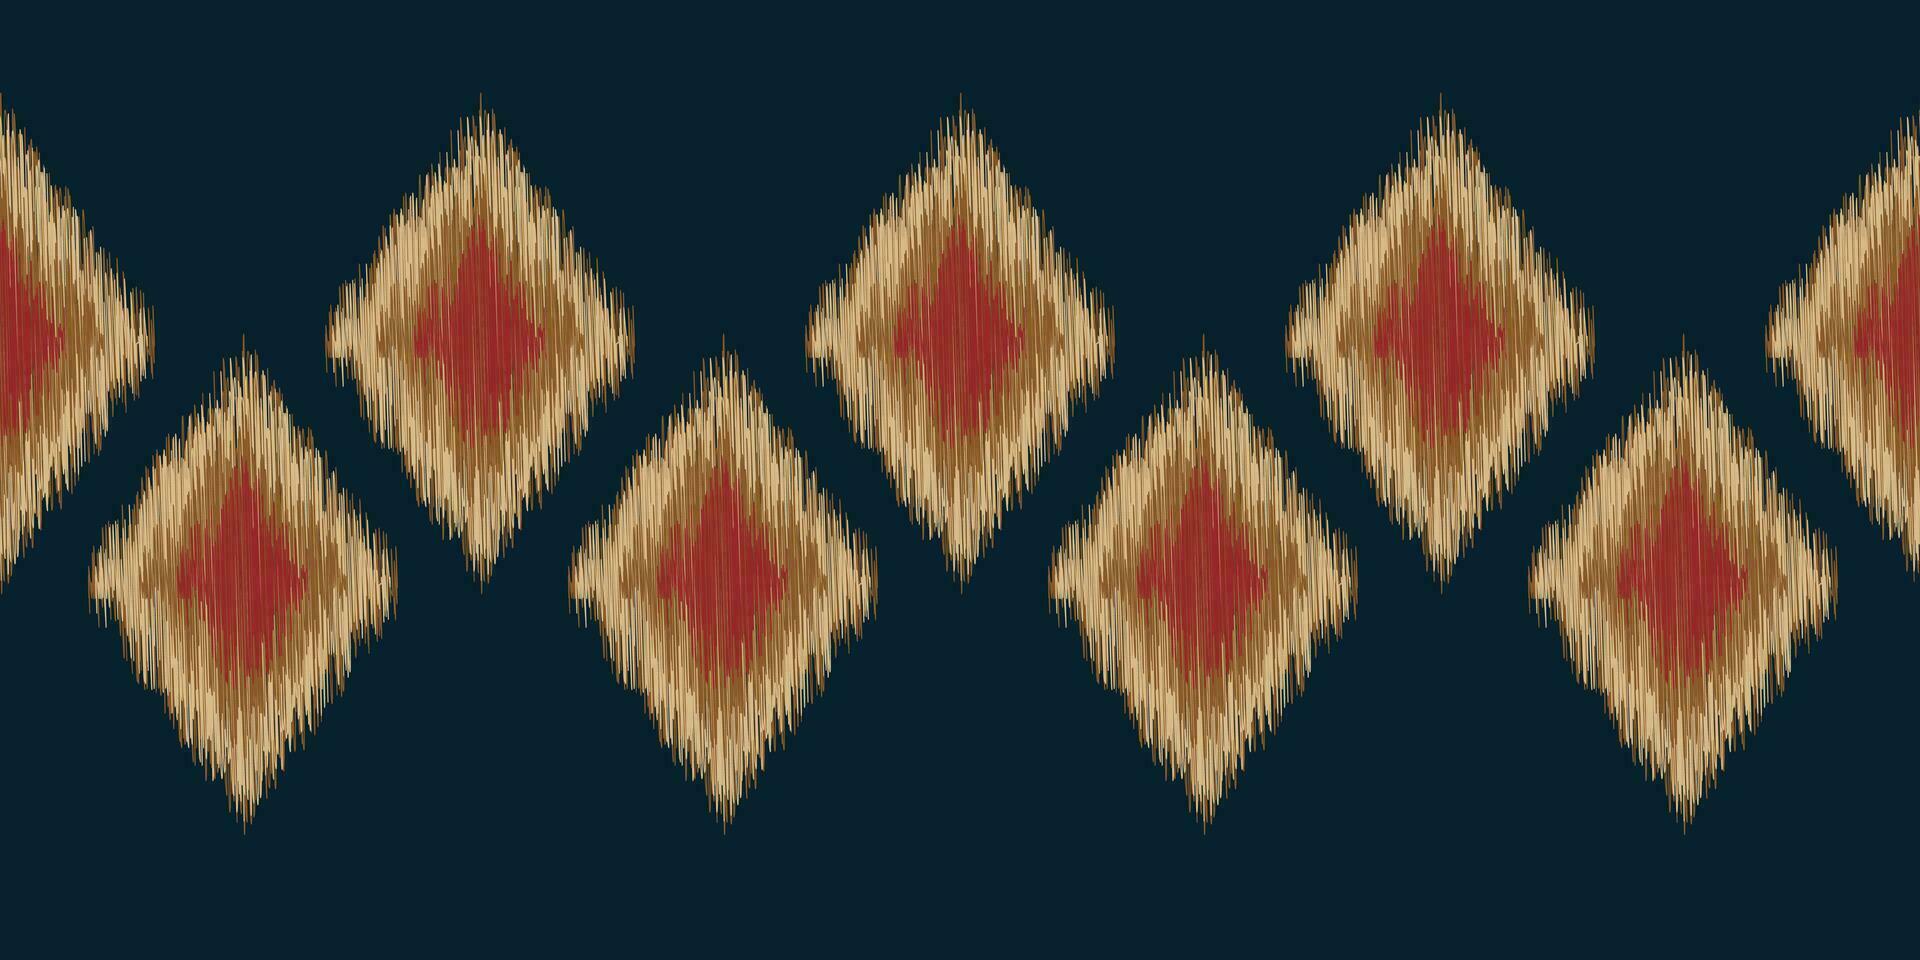 Ethnic Ikat fabric pattern geometric style.African Ikat embroidery Ethnic oriental pattern blue background. Abstract,vector,illustration.Texture,clothing,frame,decoration,carpet,motif. vector